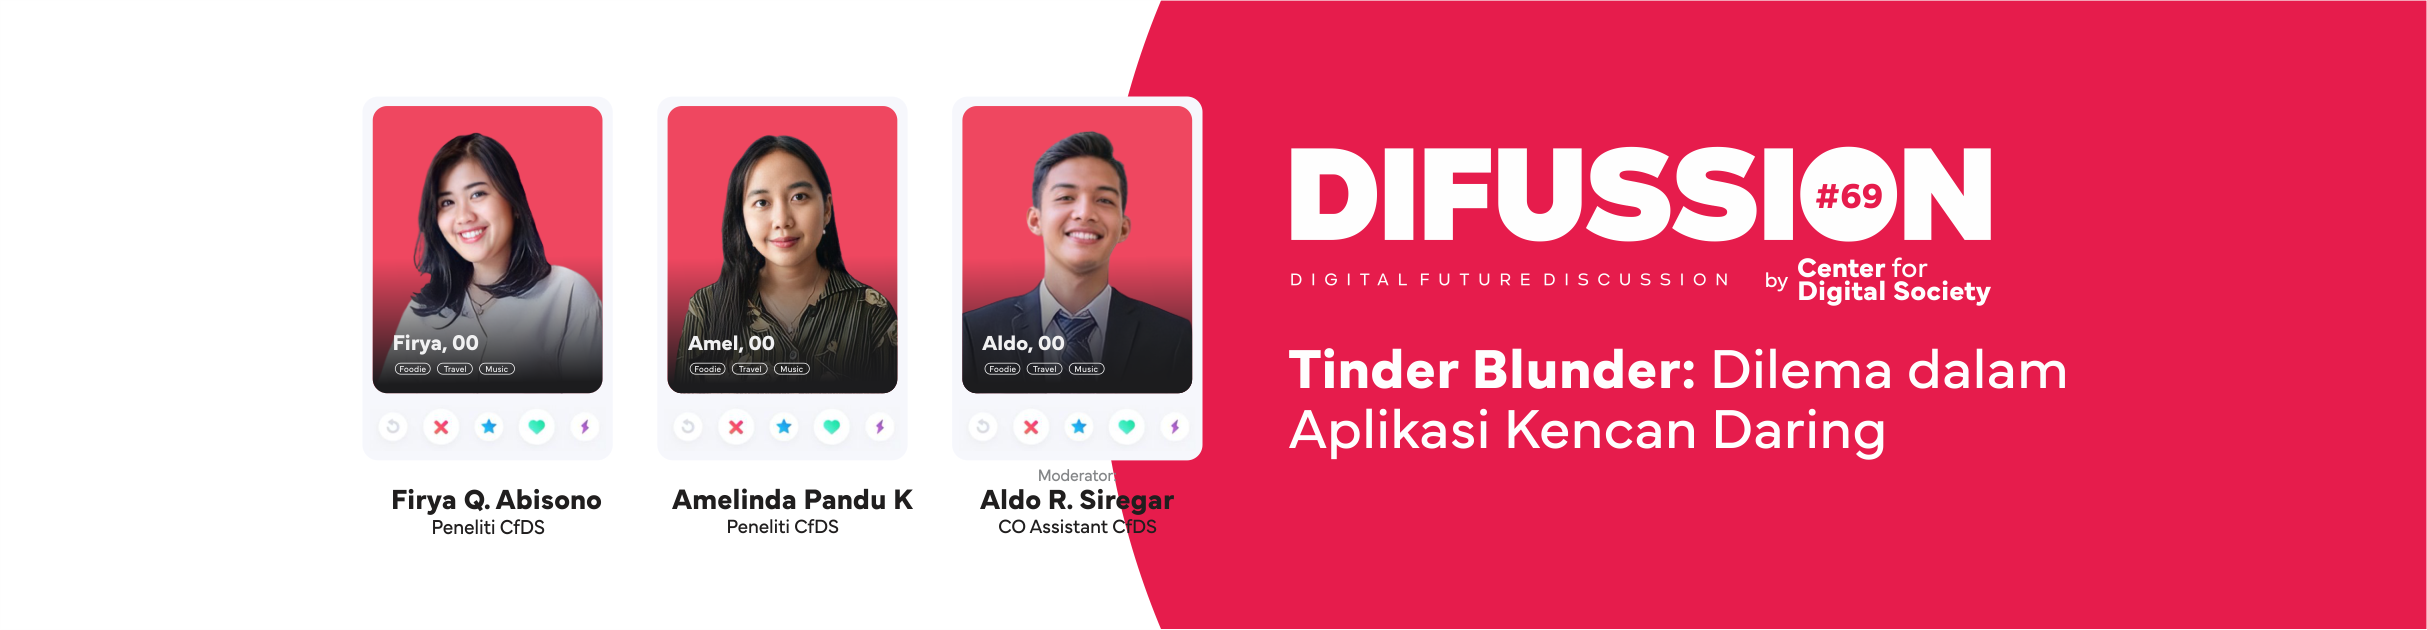 [Press Release] Difussion #69 “Tinder Blunder: A Dilemma in Online Dating Apps”